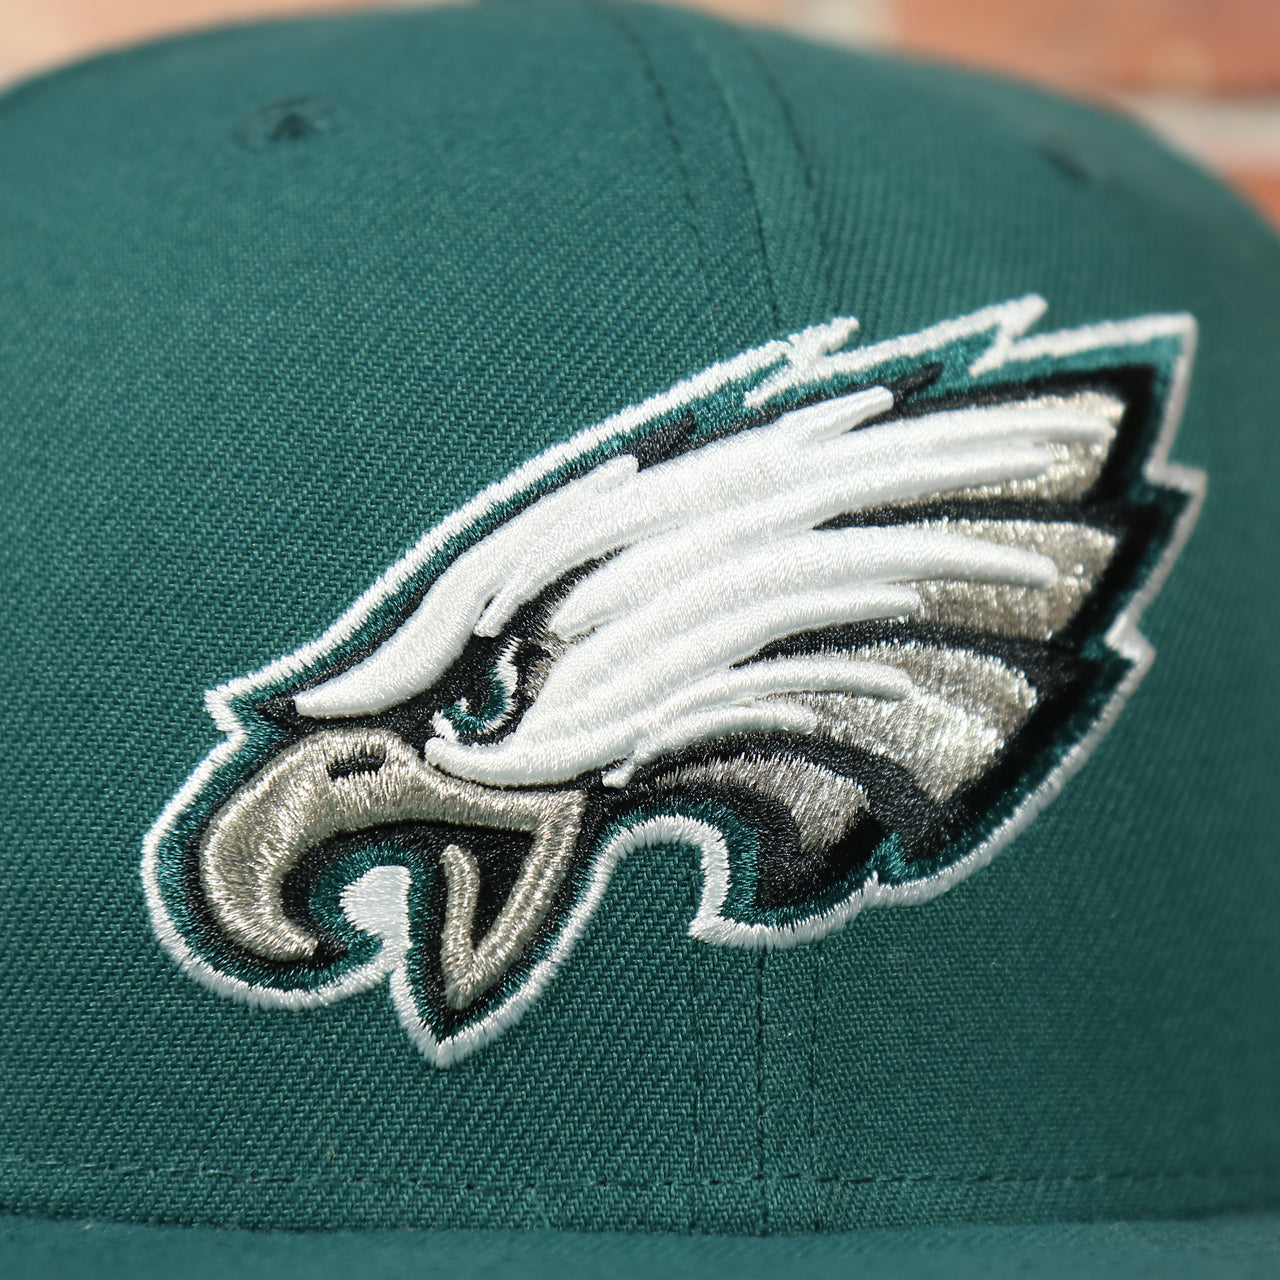 eagles logo on the EAGLES Fitted hat on field current logo pine green colorway with metallic and white logo | 59FIFTY (5950) FITTED CAP | PINE NEEDLE GREEN